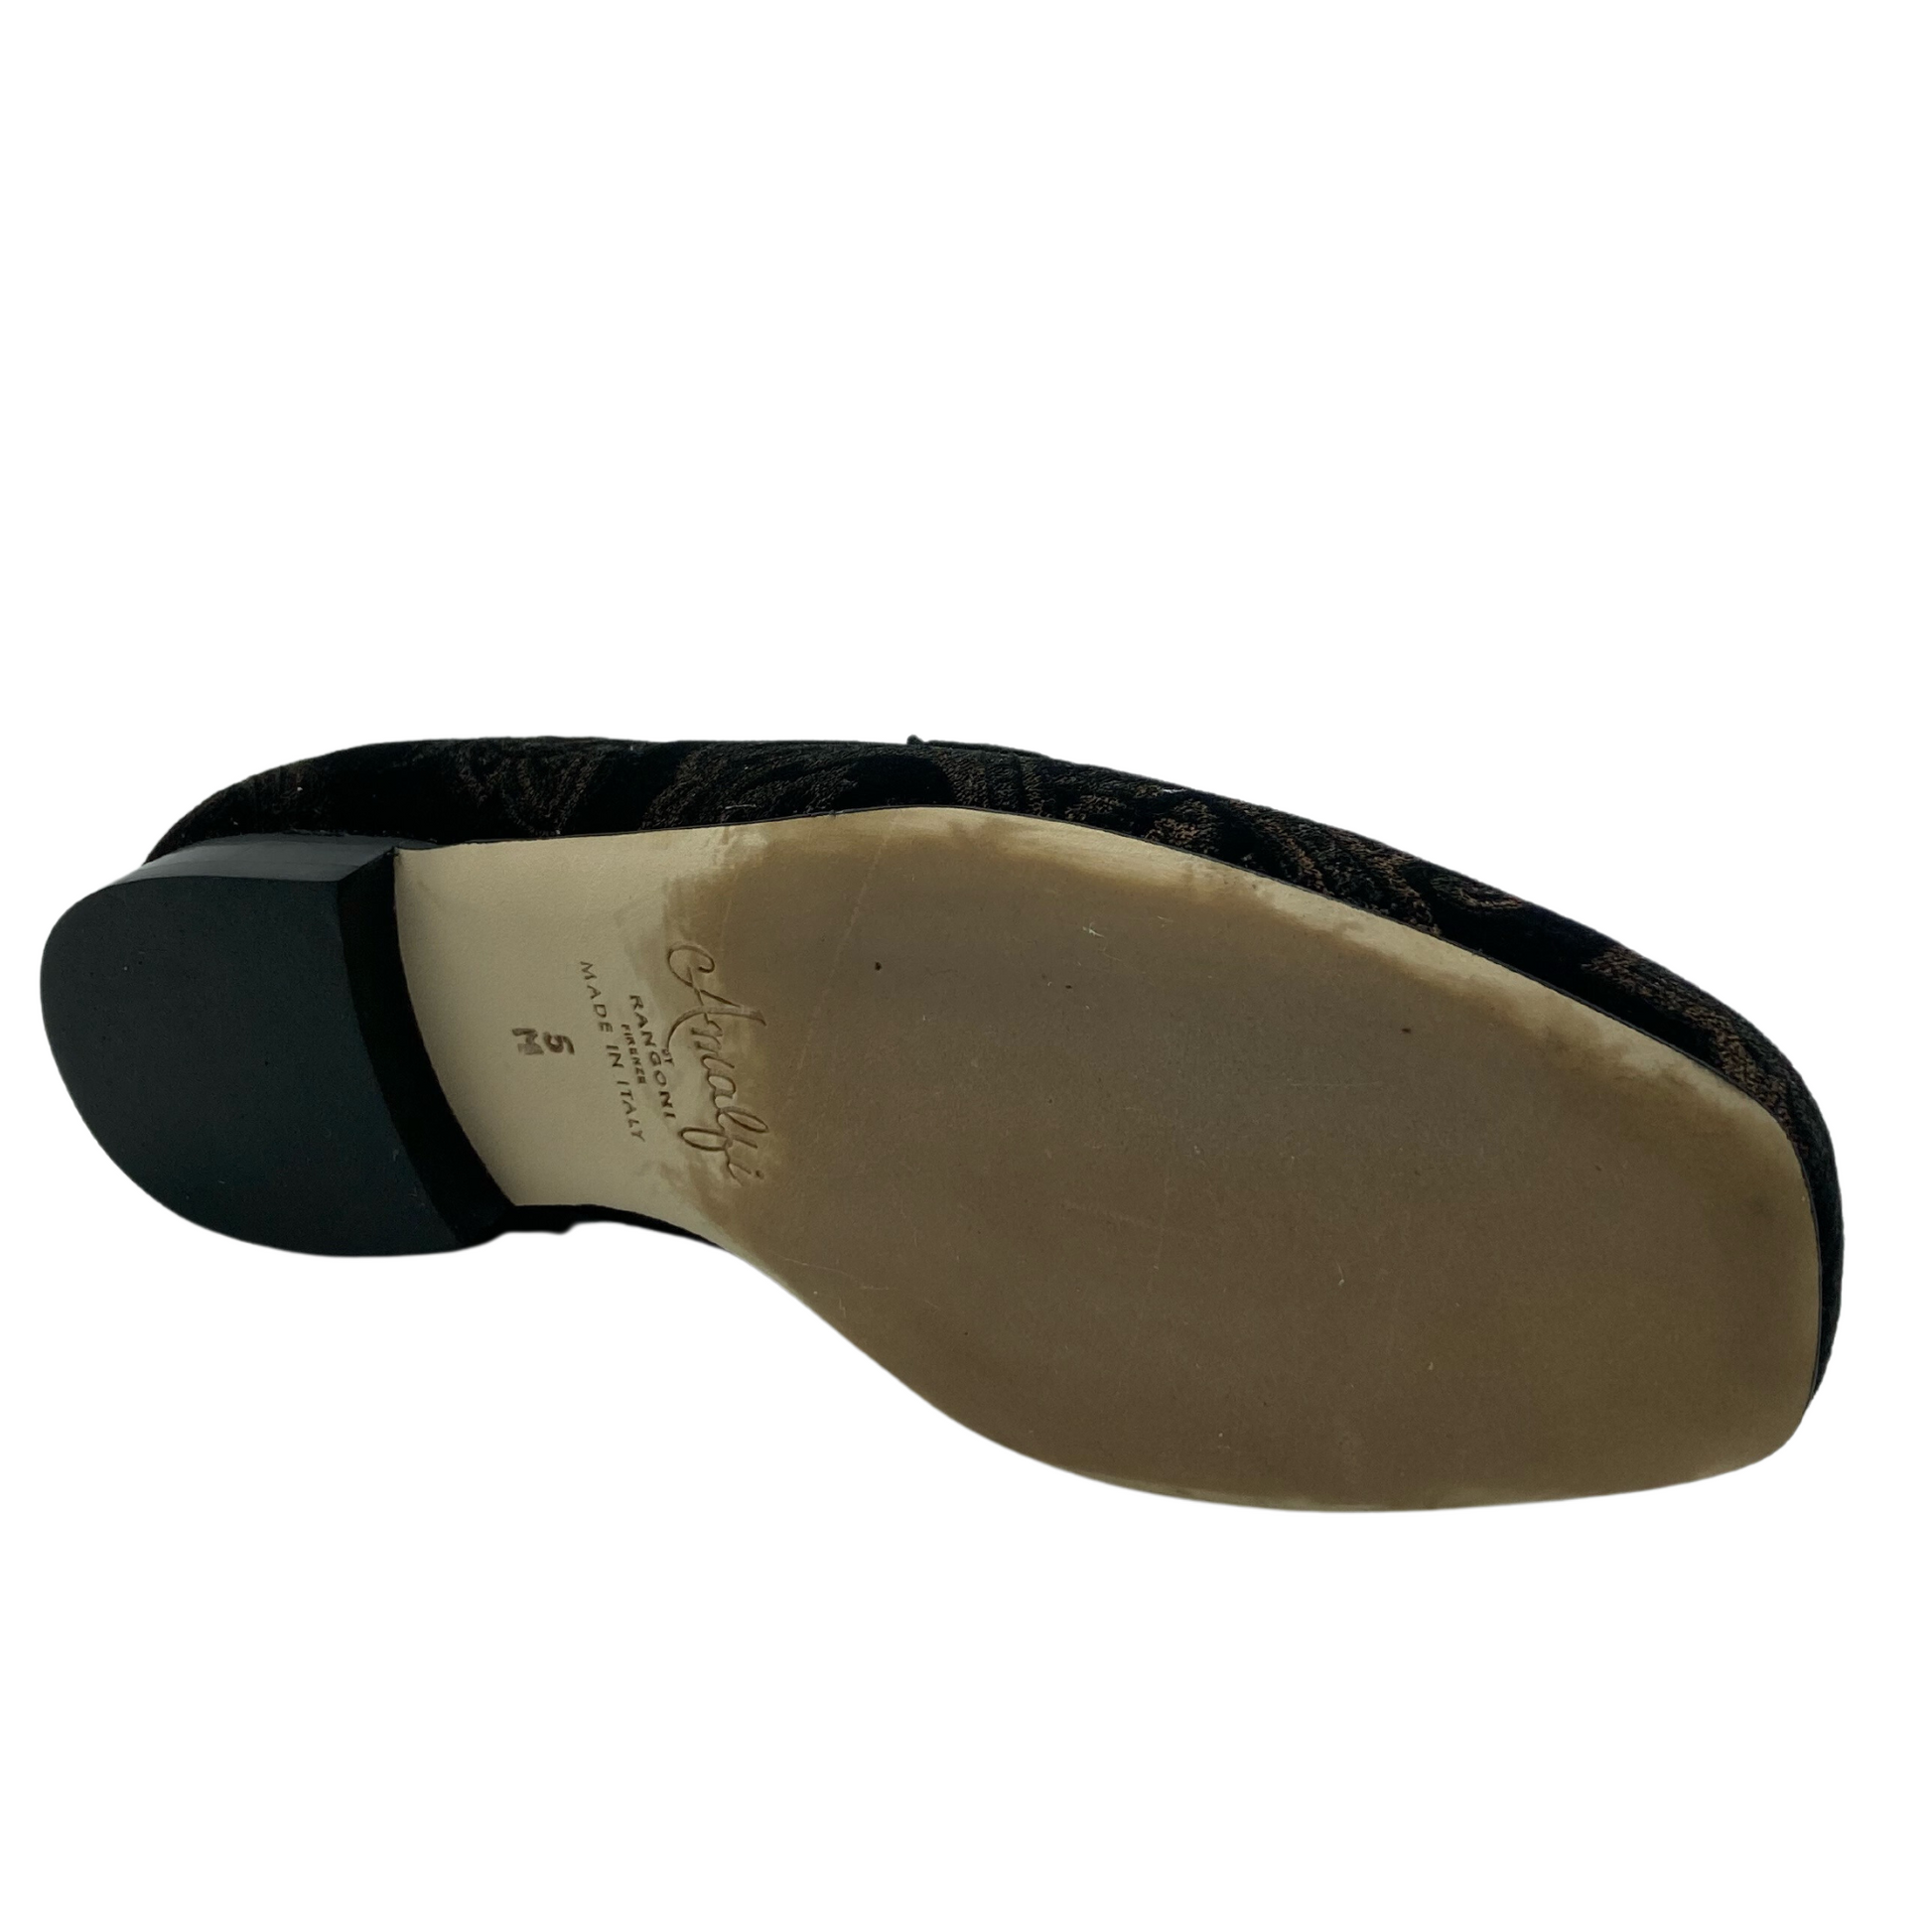 Bottom view of square toed loafer with short black heel